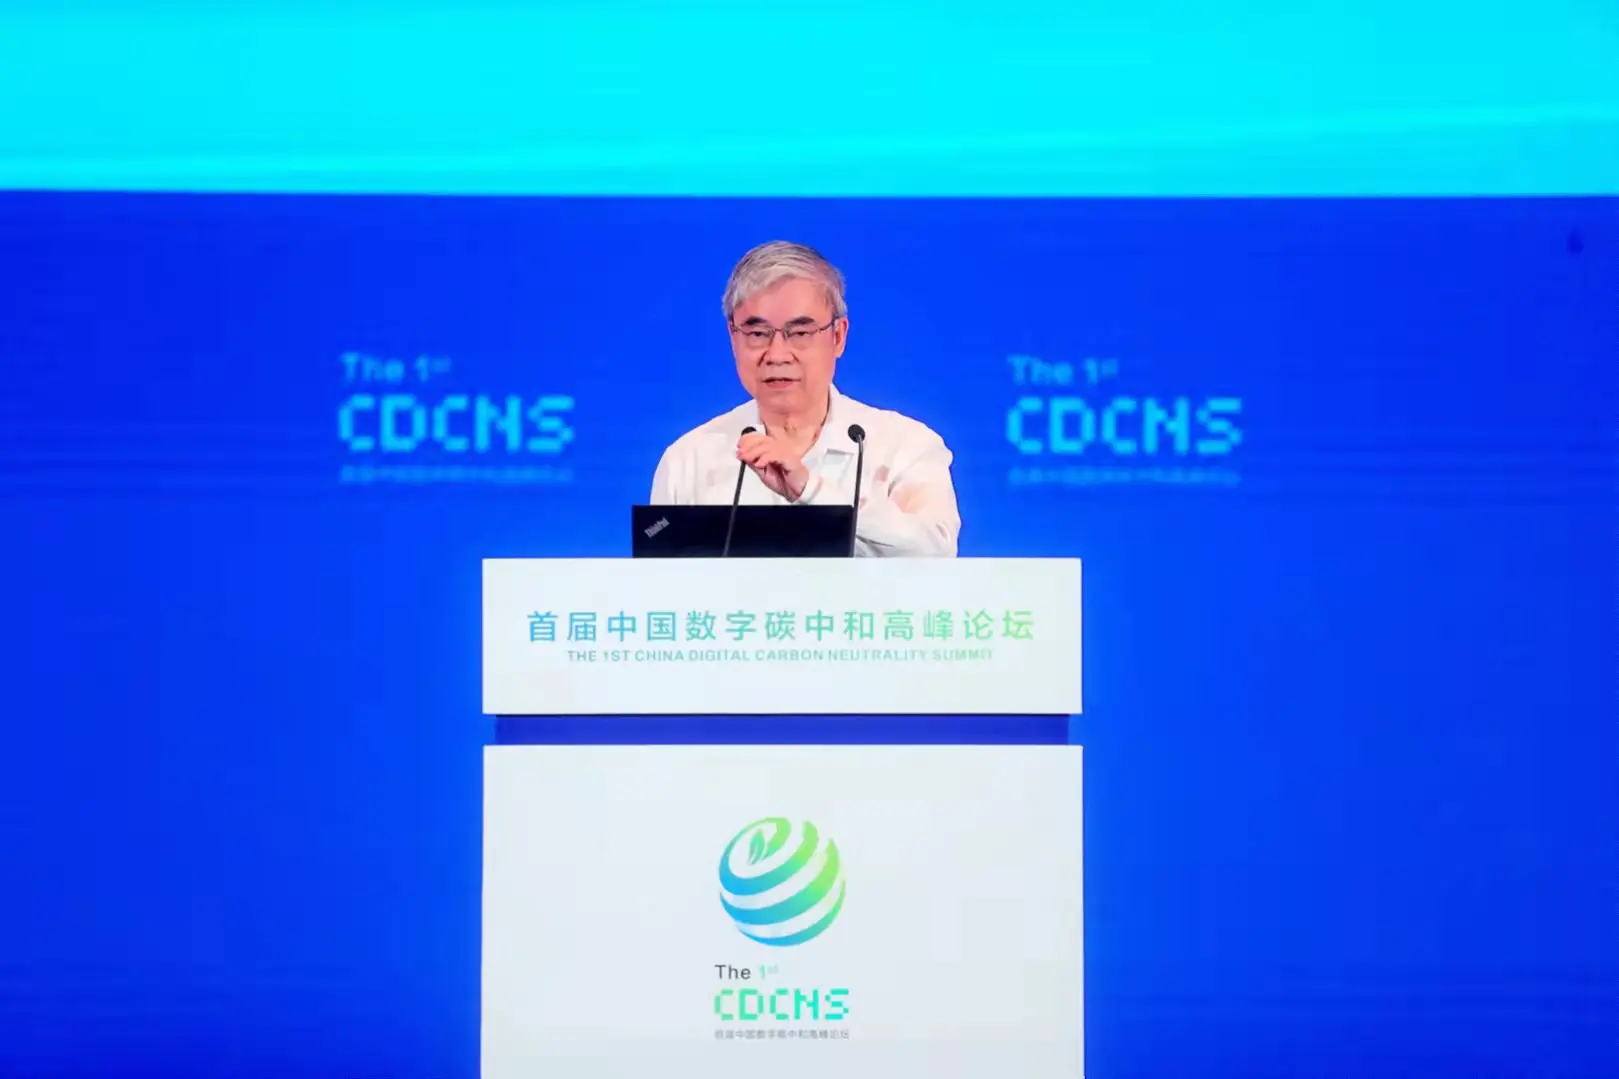 The first China Digital Carbon Neutrality Summit was held in Chengdu